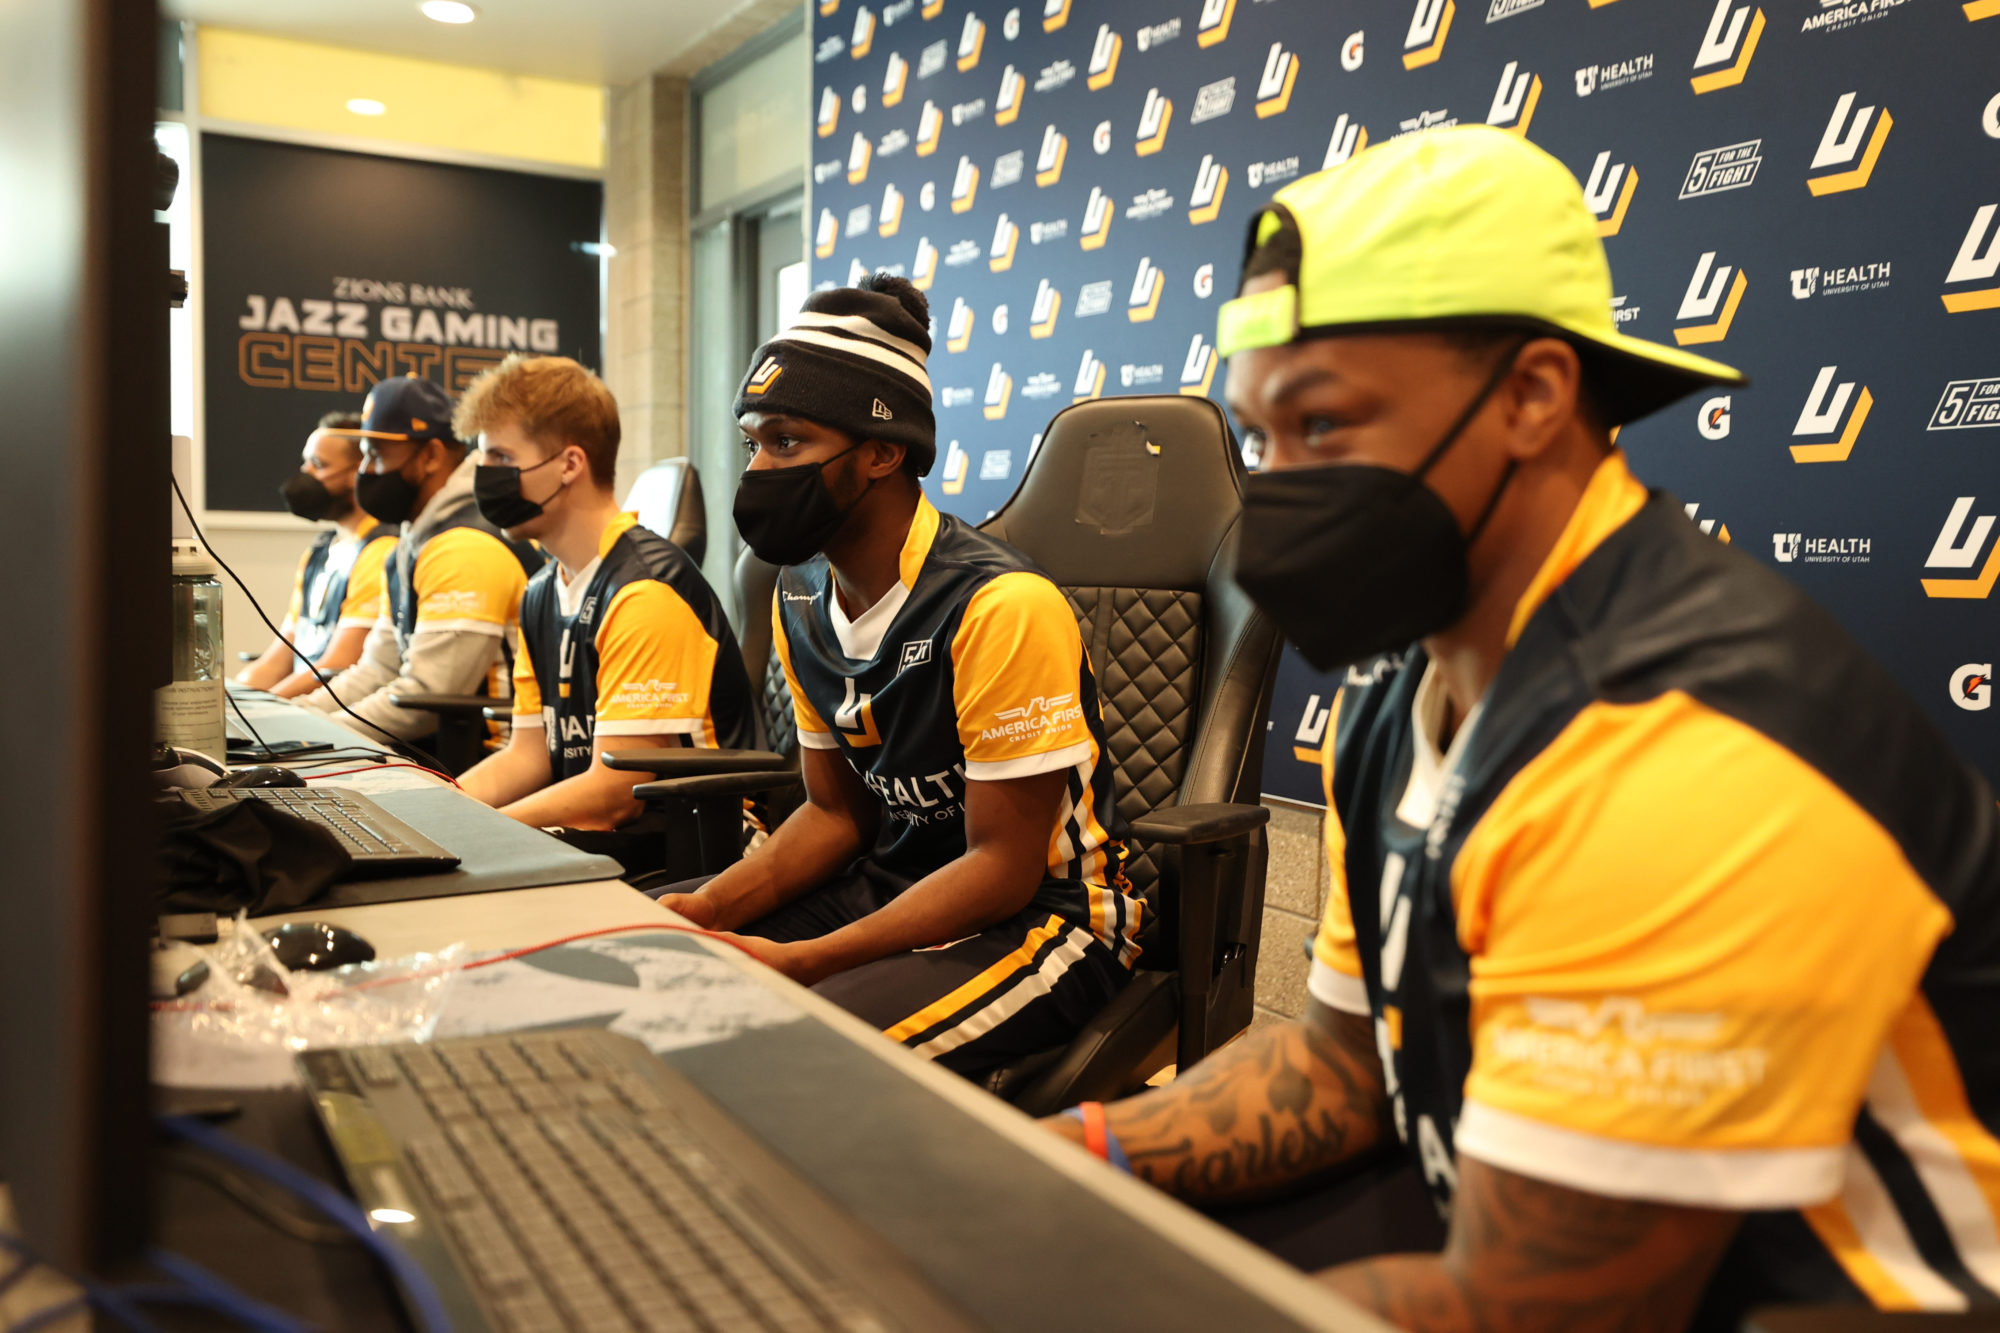 The Jazz Gaming league is having a moment as one of the first eSports teams in Utah.